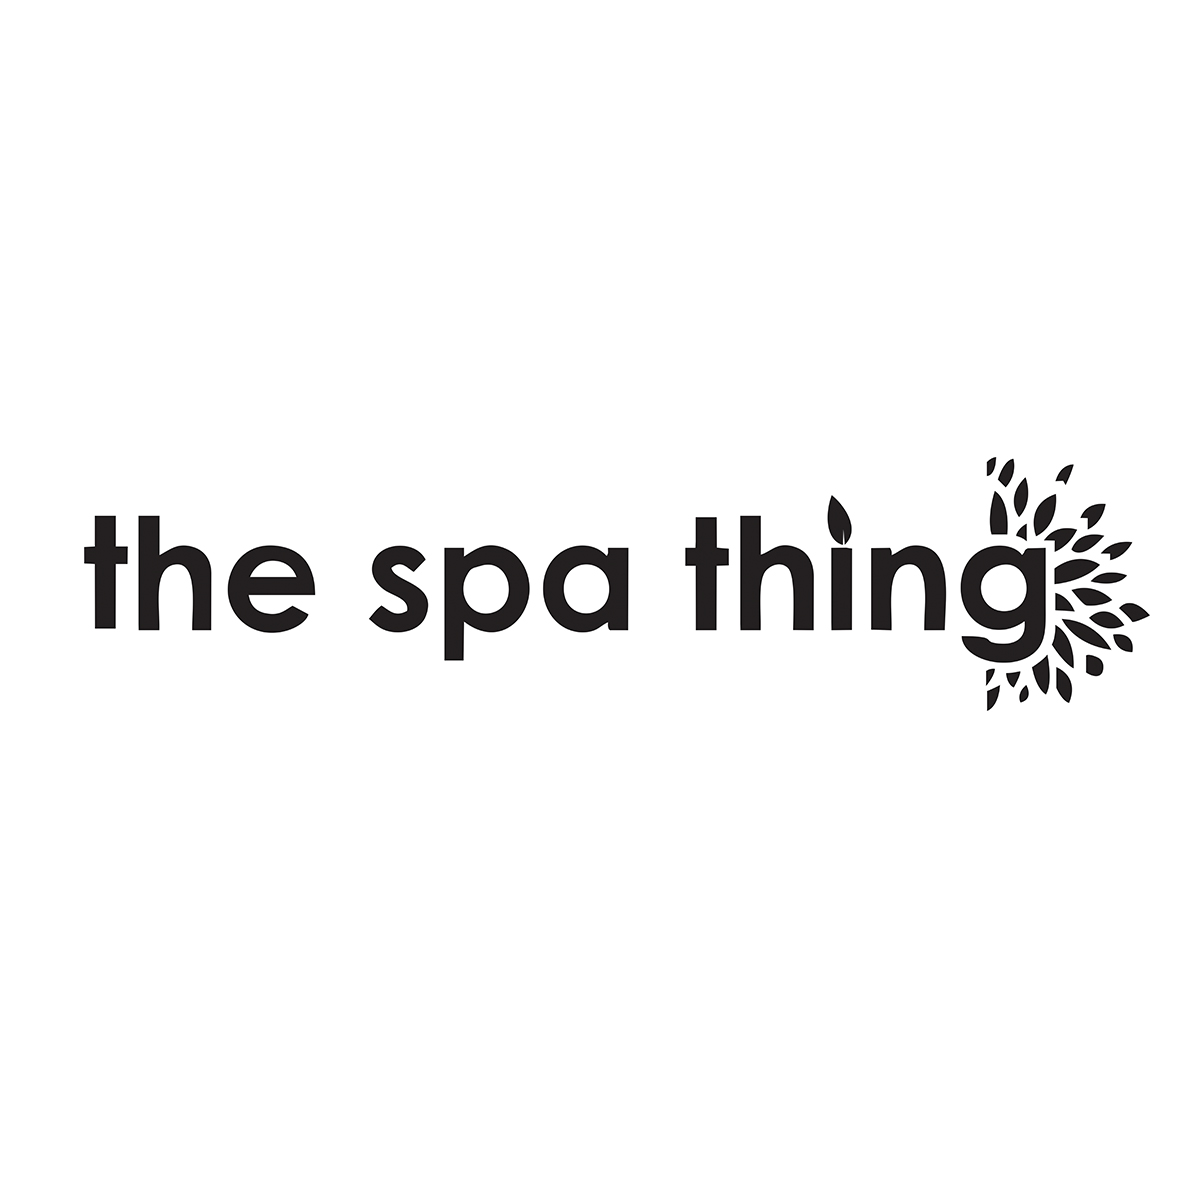 The Spa Thing, Next Galleria Malls